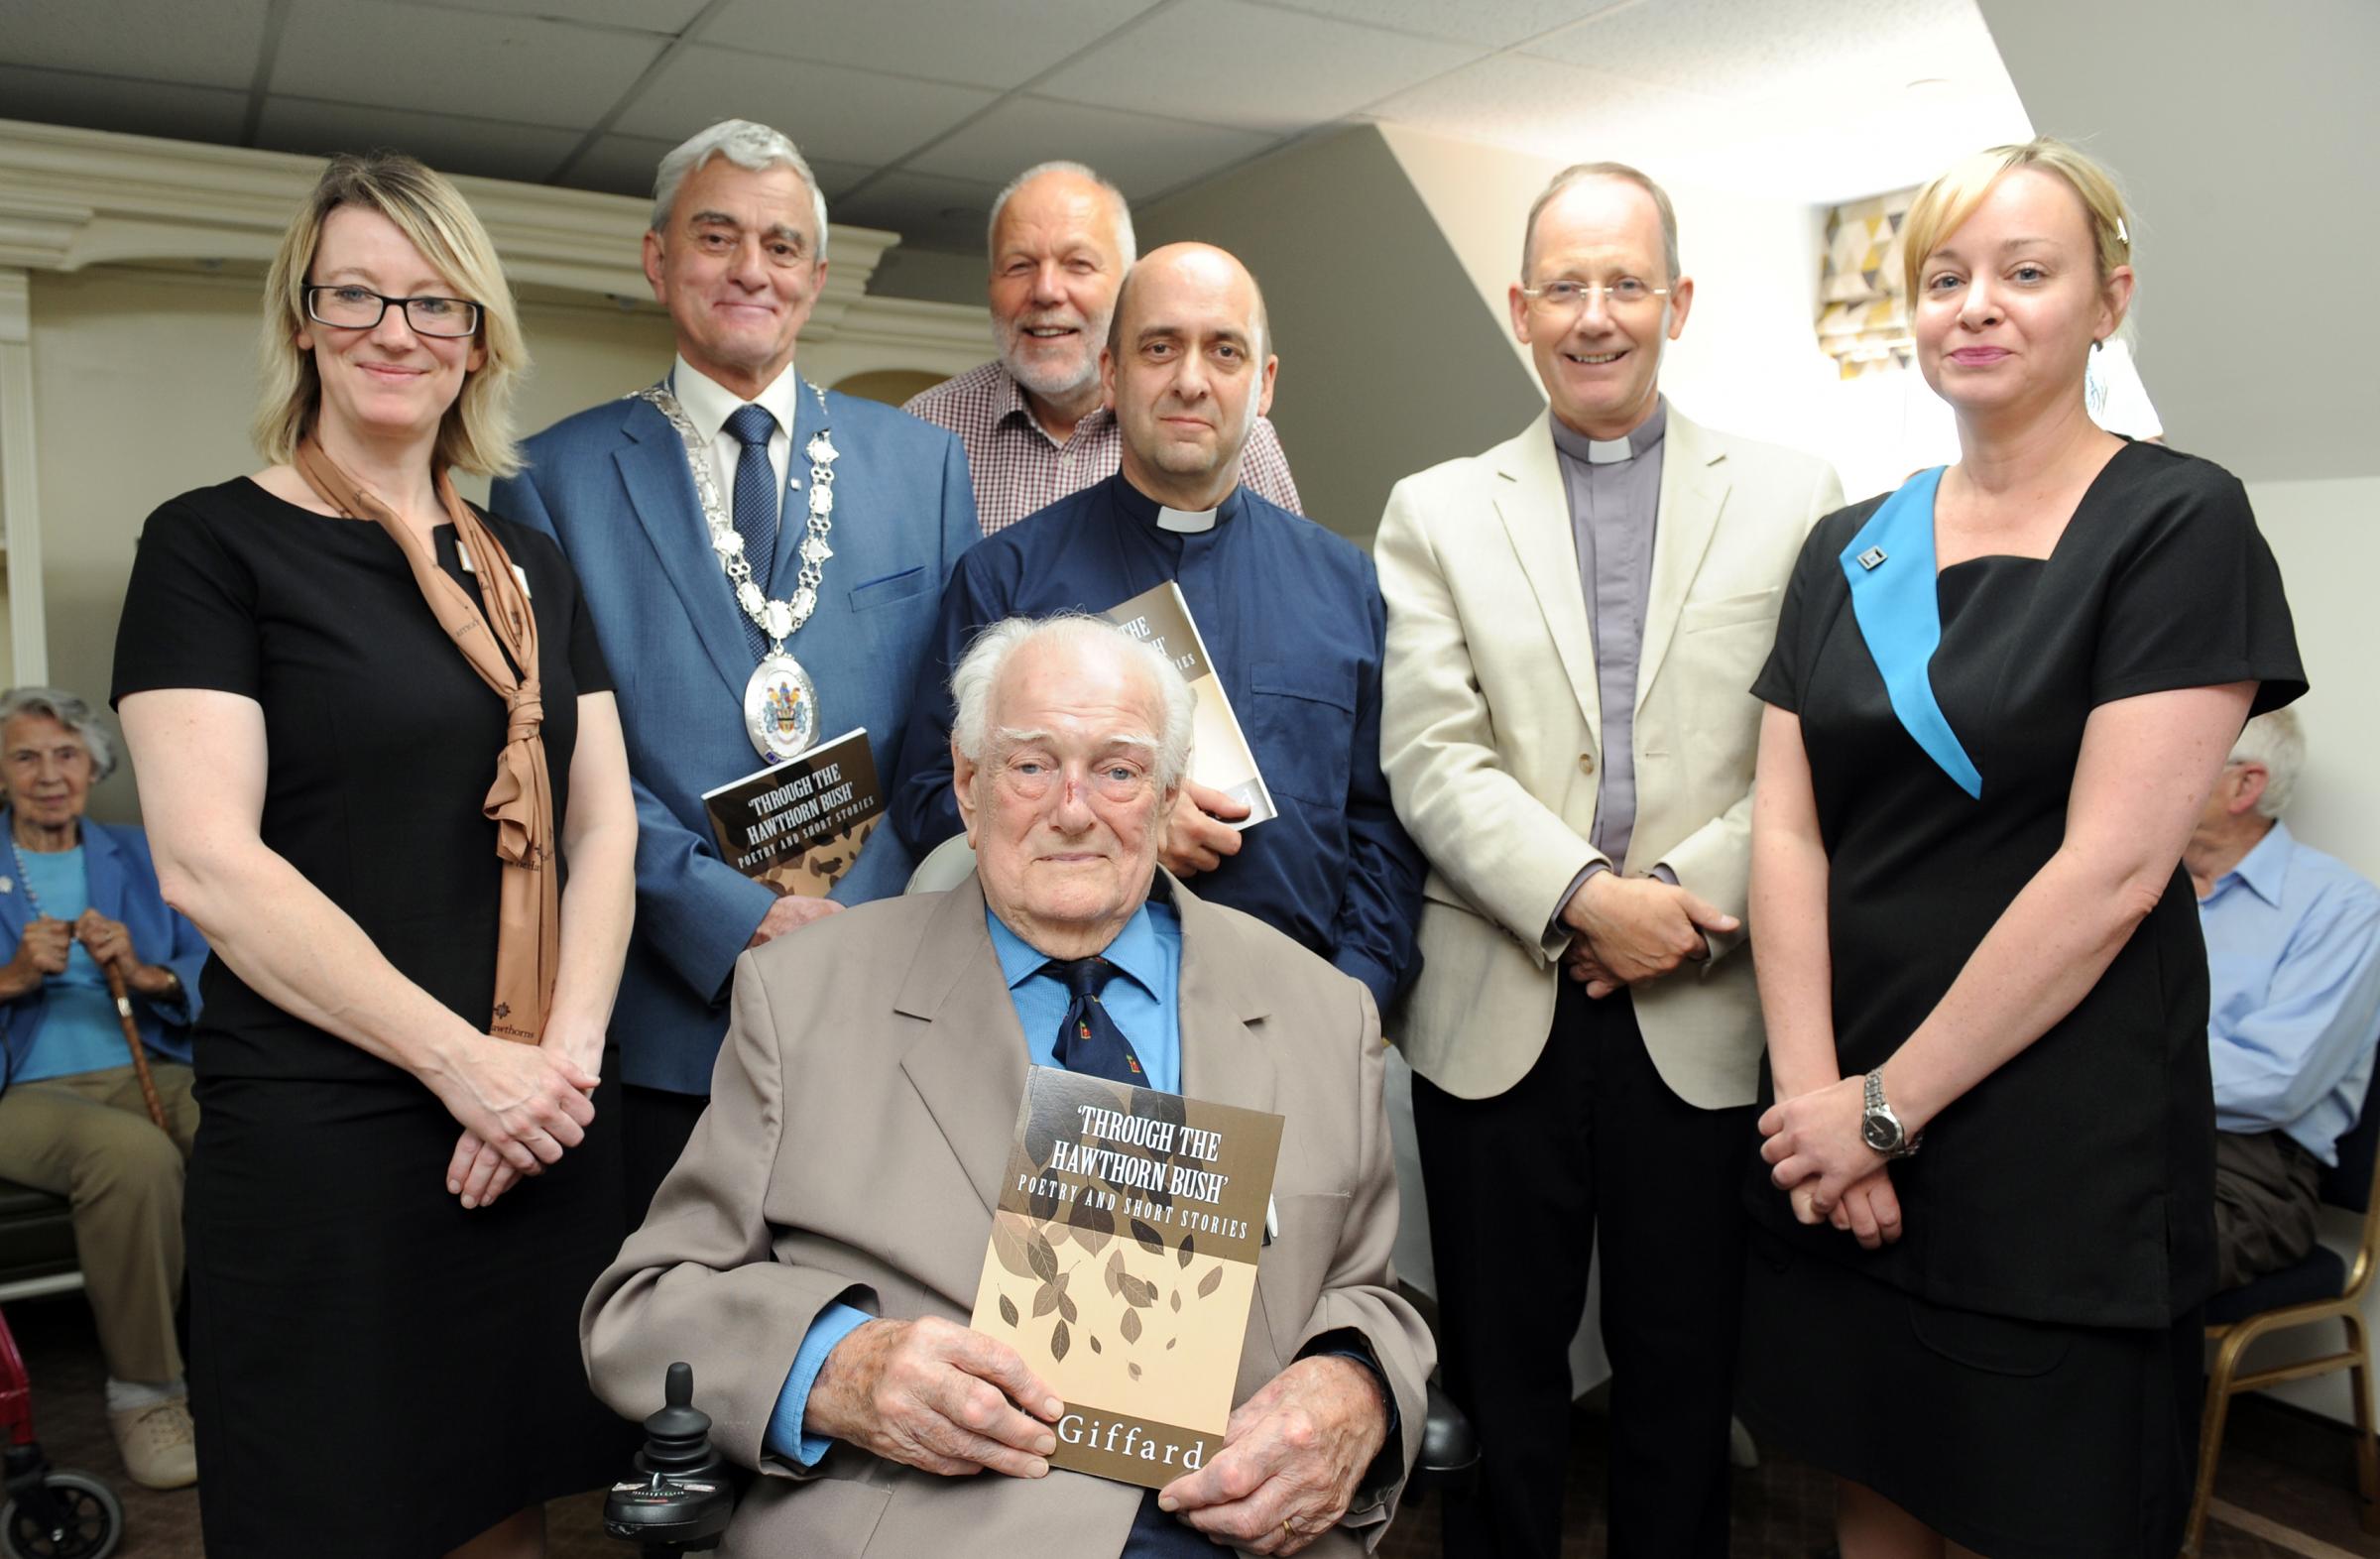 Poetic pensioner's homeless charity book launch hailed a huge success